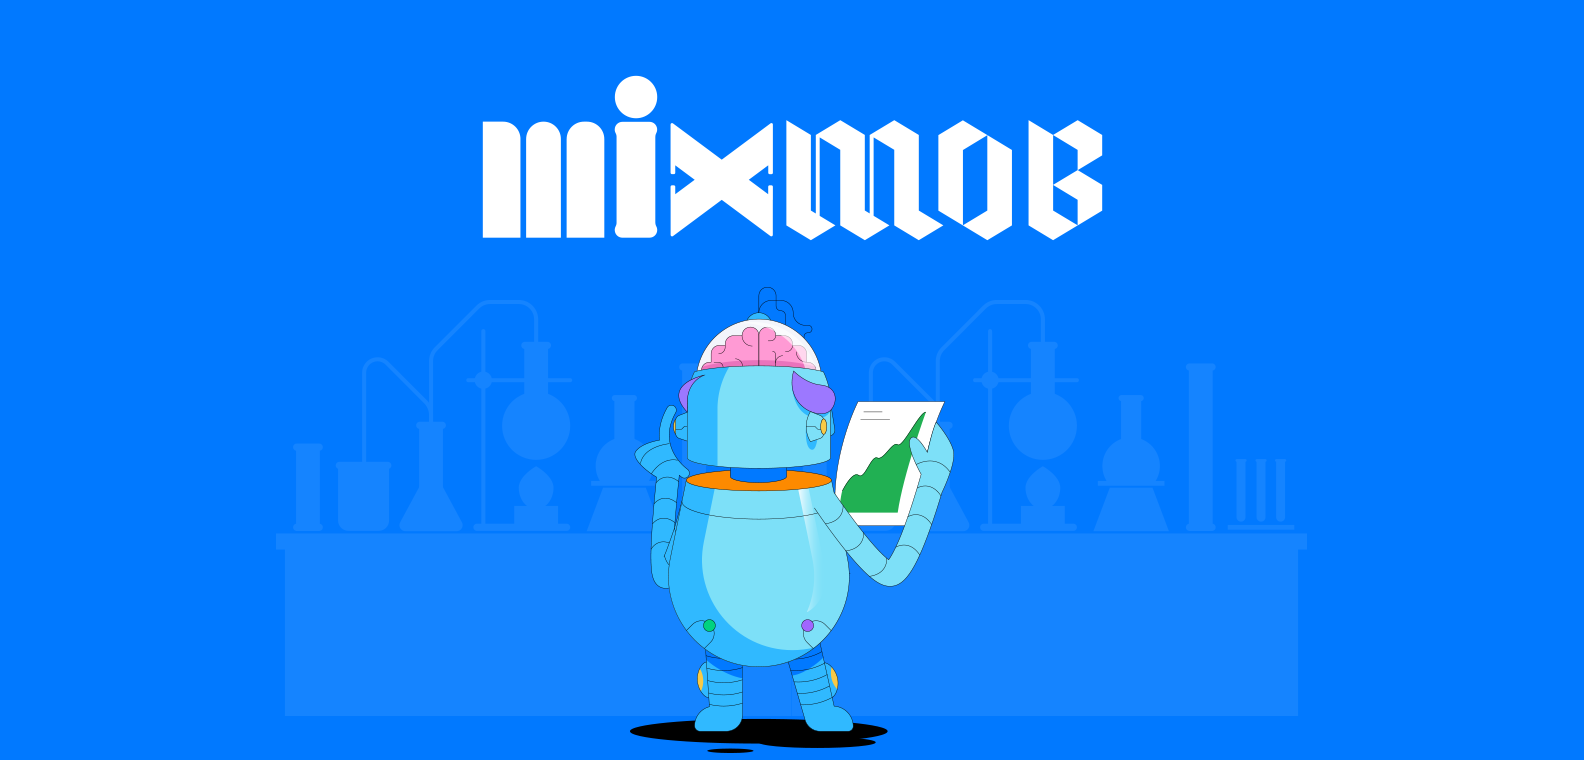 Mixmob: Card Strategy Game Overview